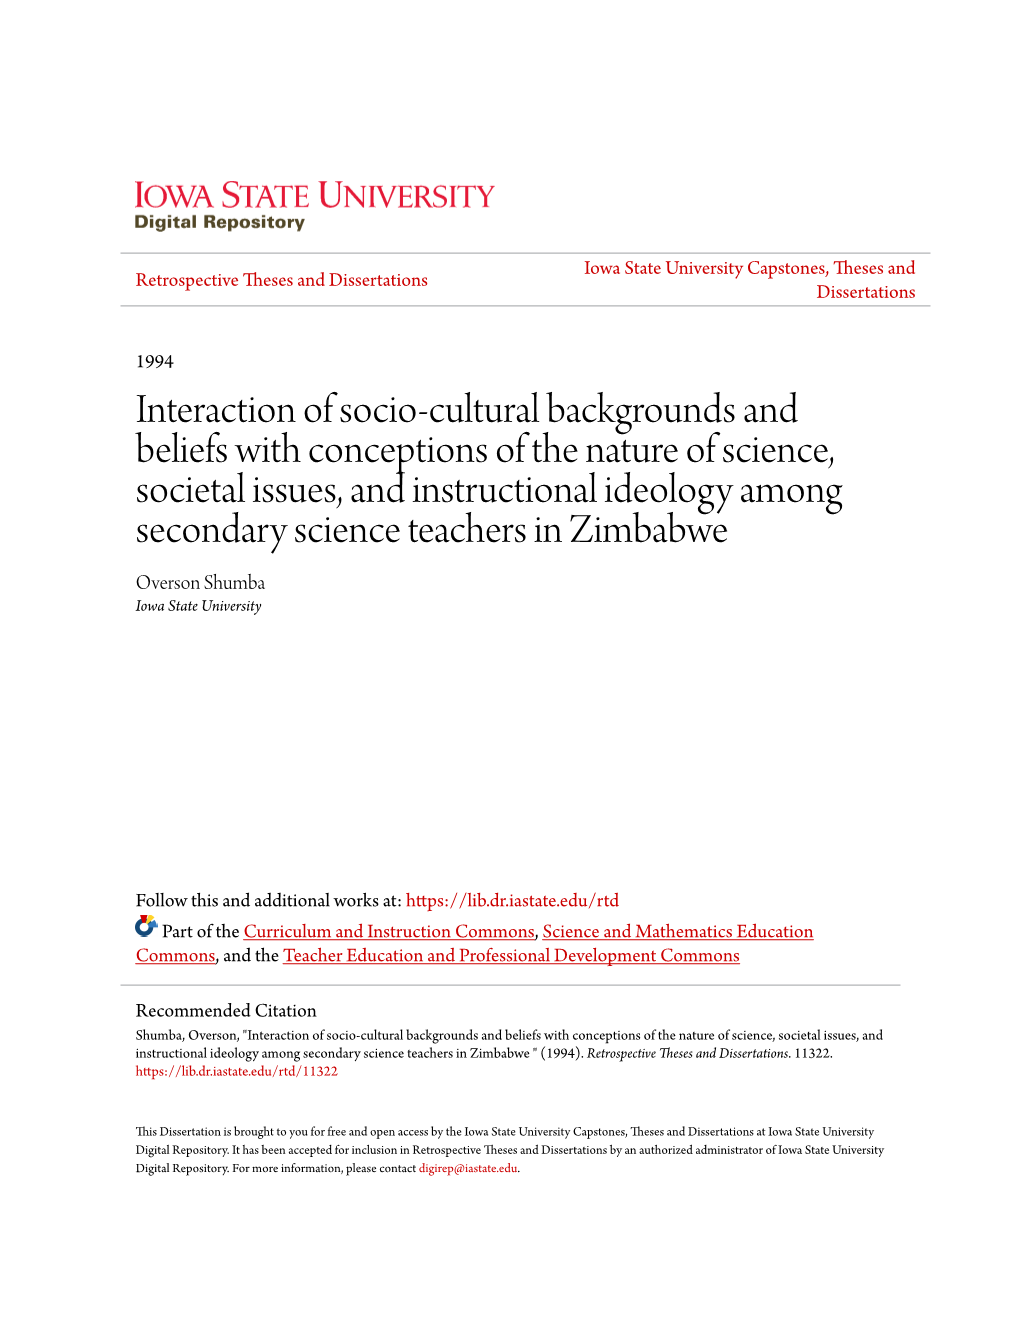 Interaction of Socio-Cultural Backgrounds and Beliefs With